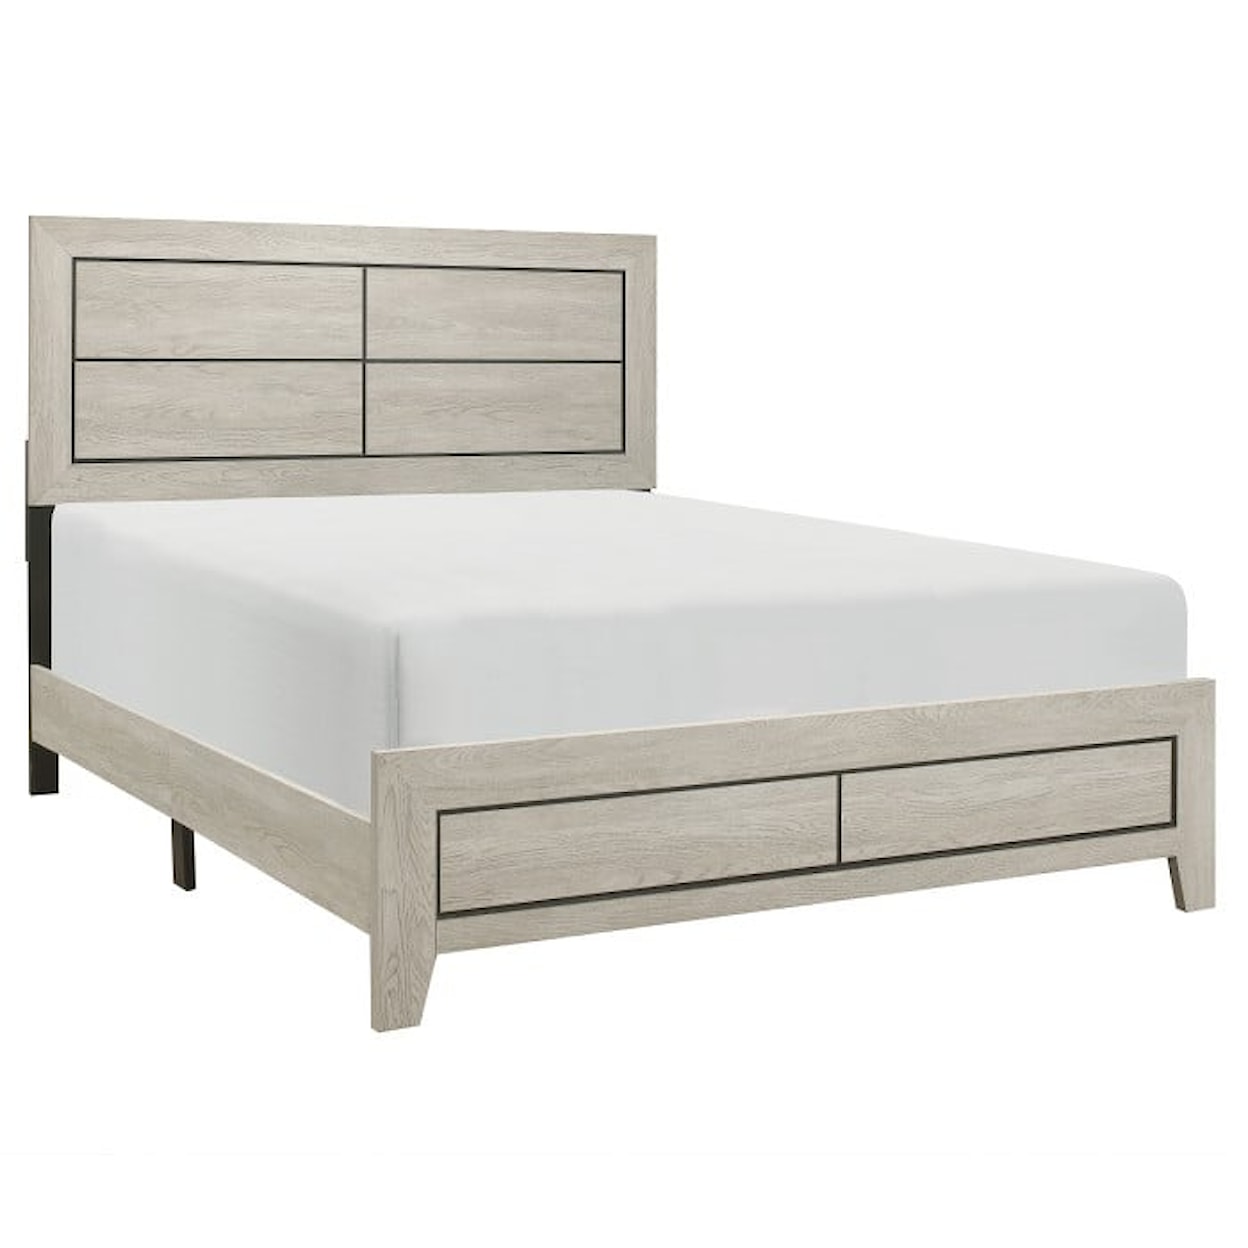 Homelegance Quinby CA King Bed